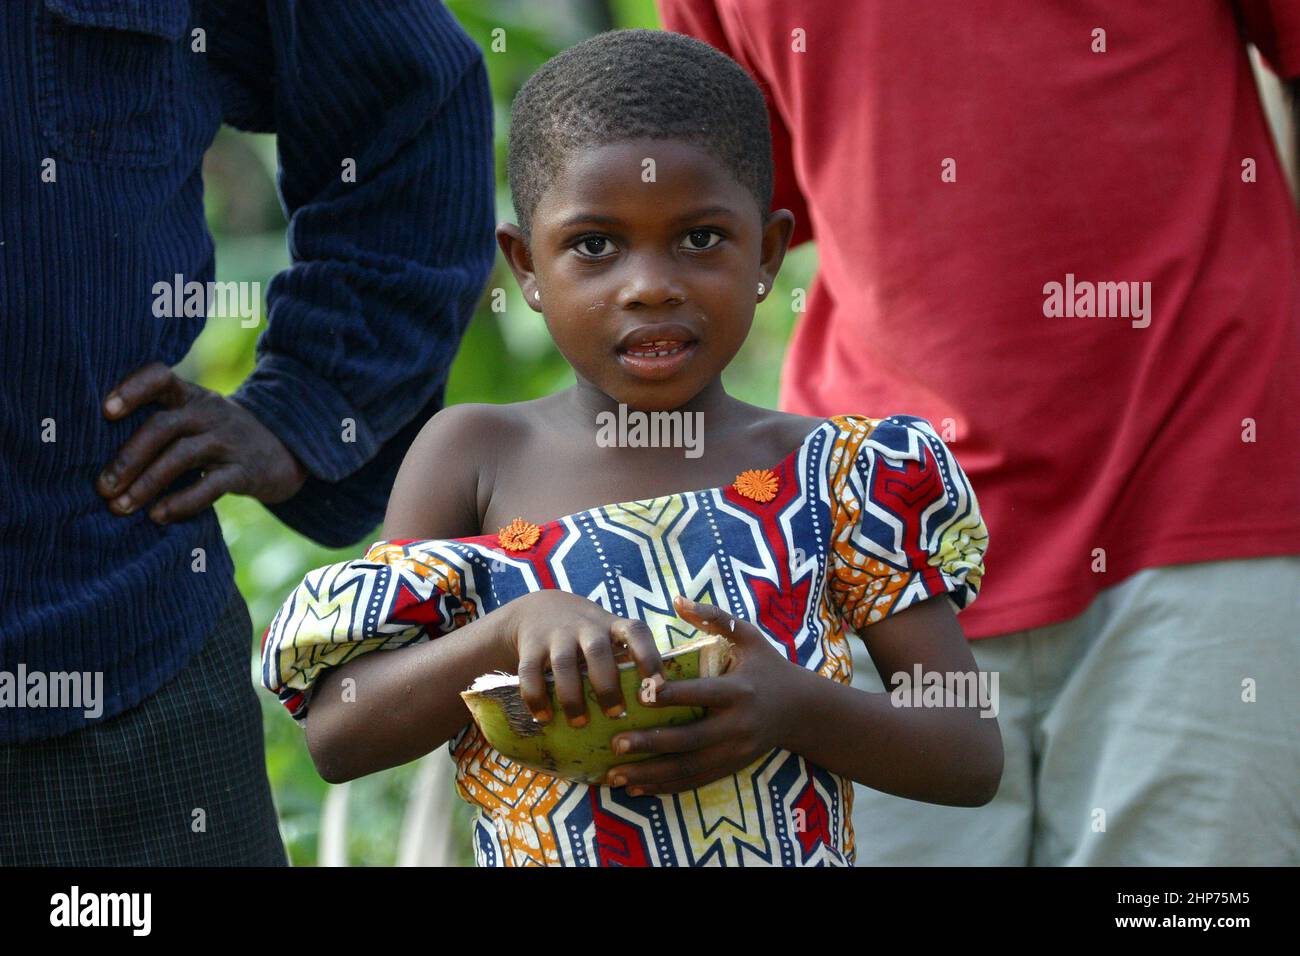 Child in traditional dress Ghana Africa Stock Photo